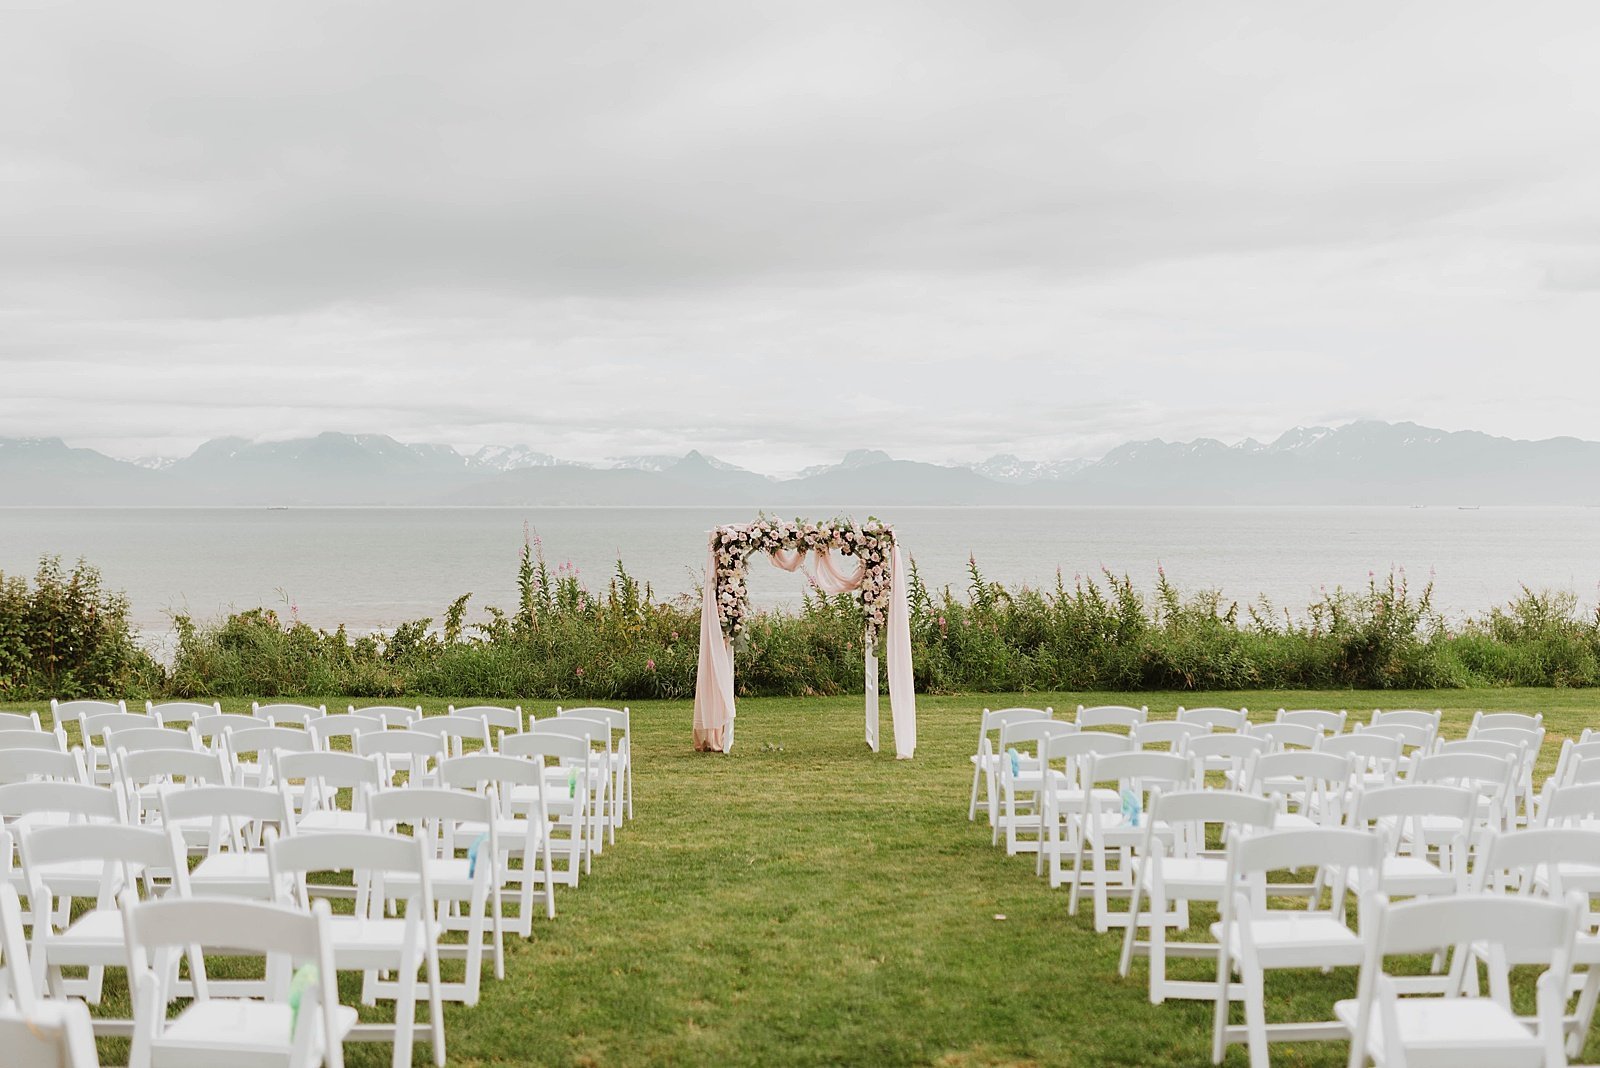  Ceremony set up on a lawn in front of the water  in Homer, Alaska 